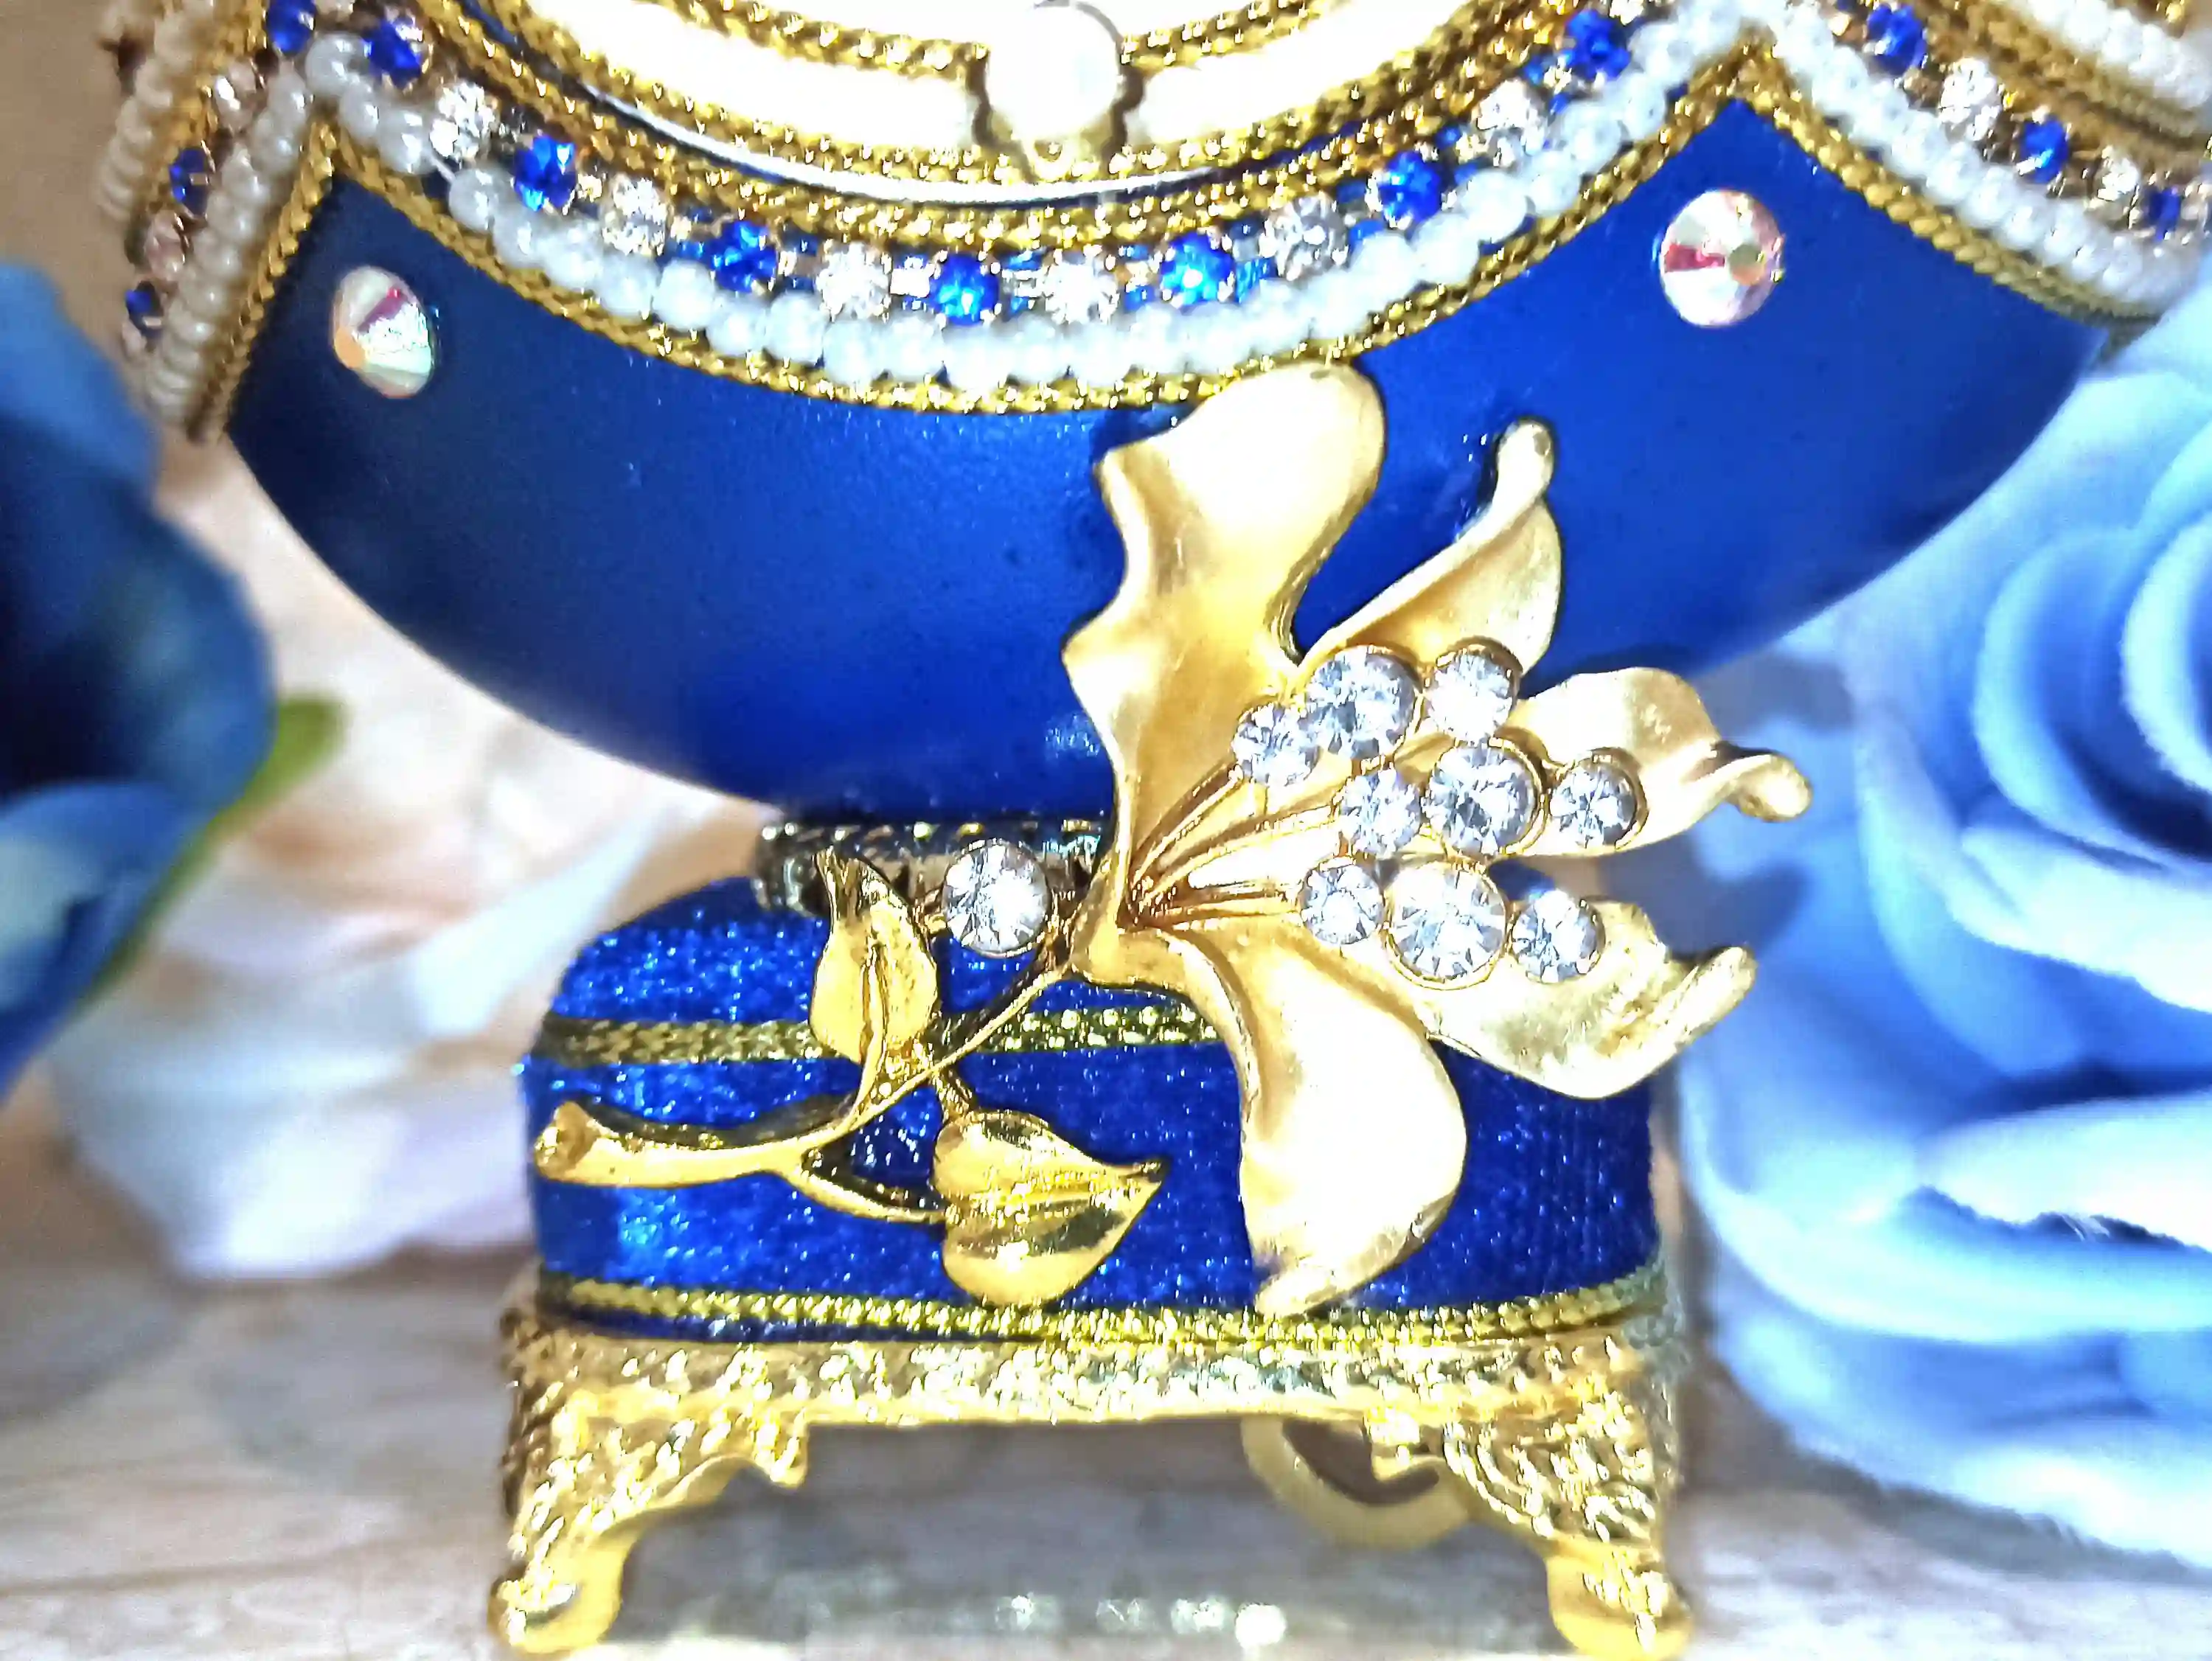 One Only - Blue Faberge Egg Luxury Wedding Gift NATURAL HAND Carved Faberge Egg Style Ring Bearer box for wedding 24k Christmas Gift for her 